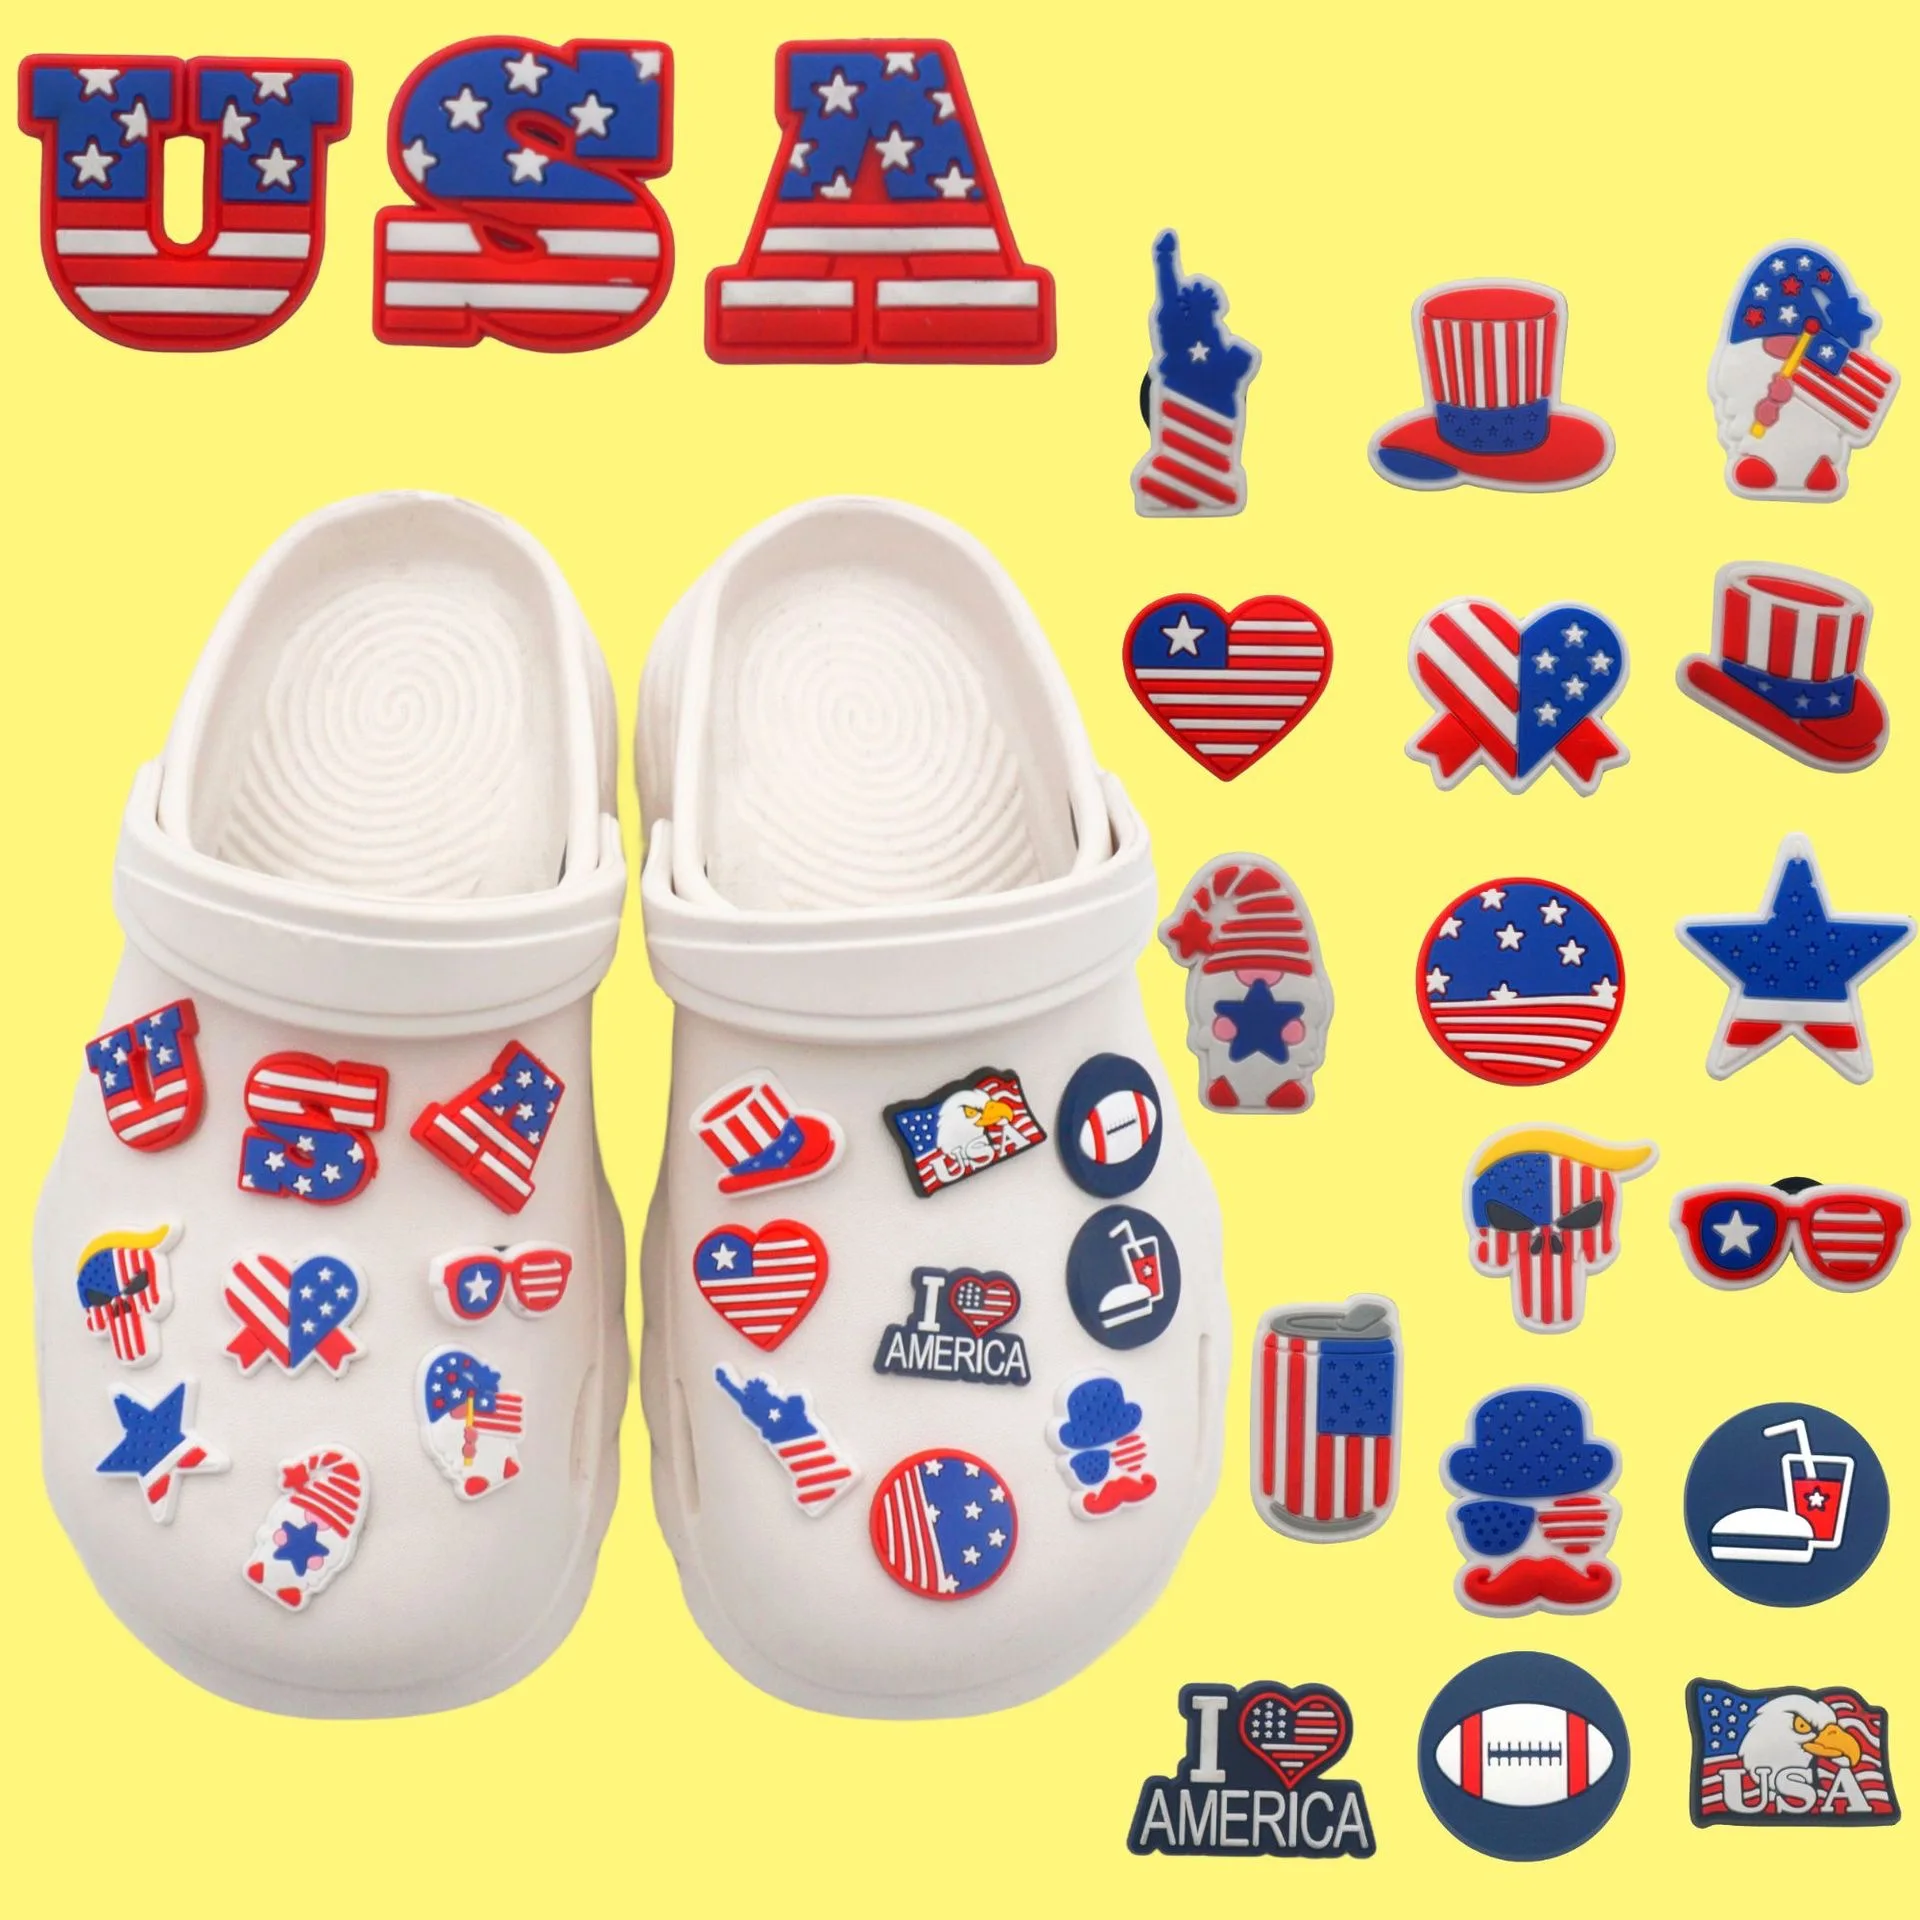 

20PCS American Flag Elements perforated shoe charm, cute shoe accessories, Statue of Liberty, USA Letters, women's and men's